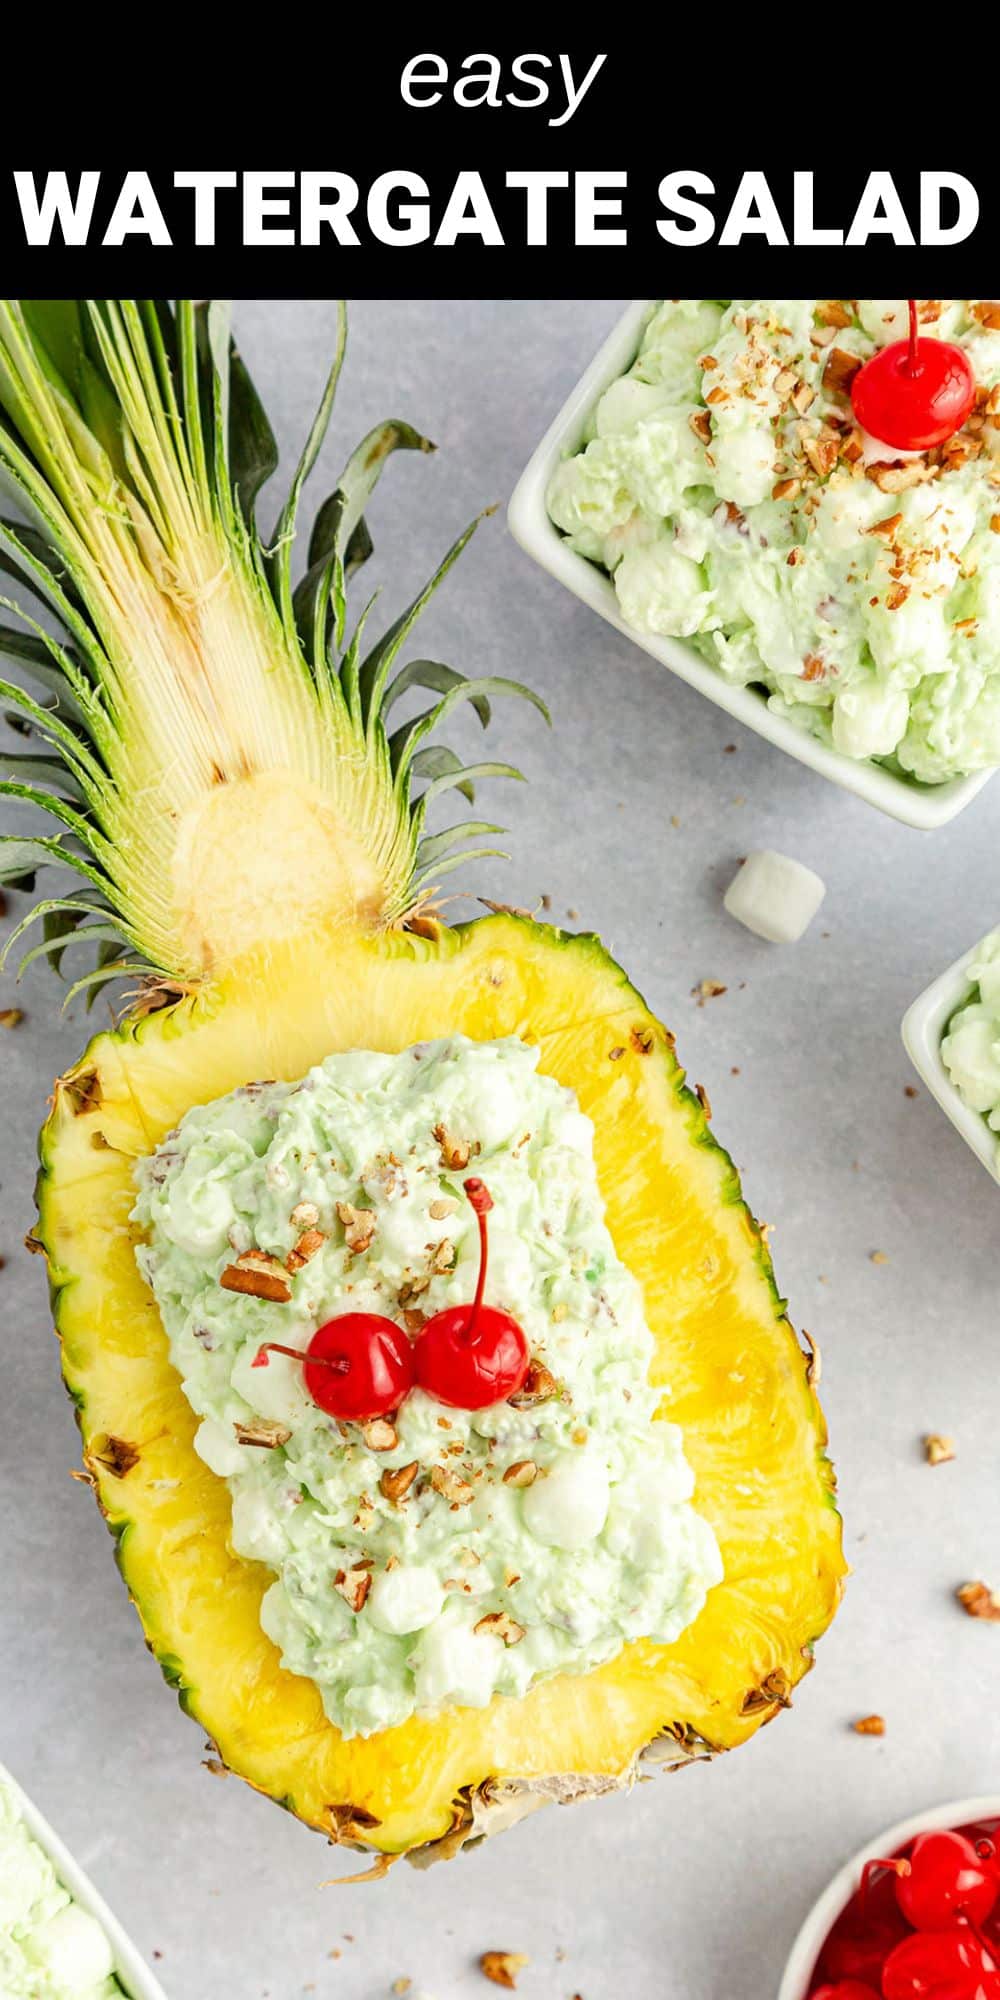 This Watergate Salad recipe combines juicy pineapple, creamy pistachio pudding, fluffy marshmallows, and cool whipped topping. It’s a sweet and delicious retro dessert salad that’s perfect for the holidays, warm summer months or any time of the year.